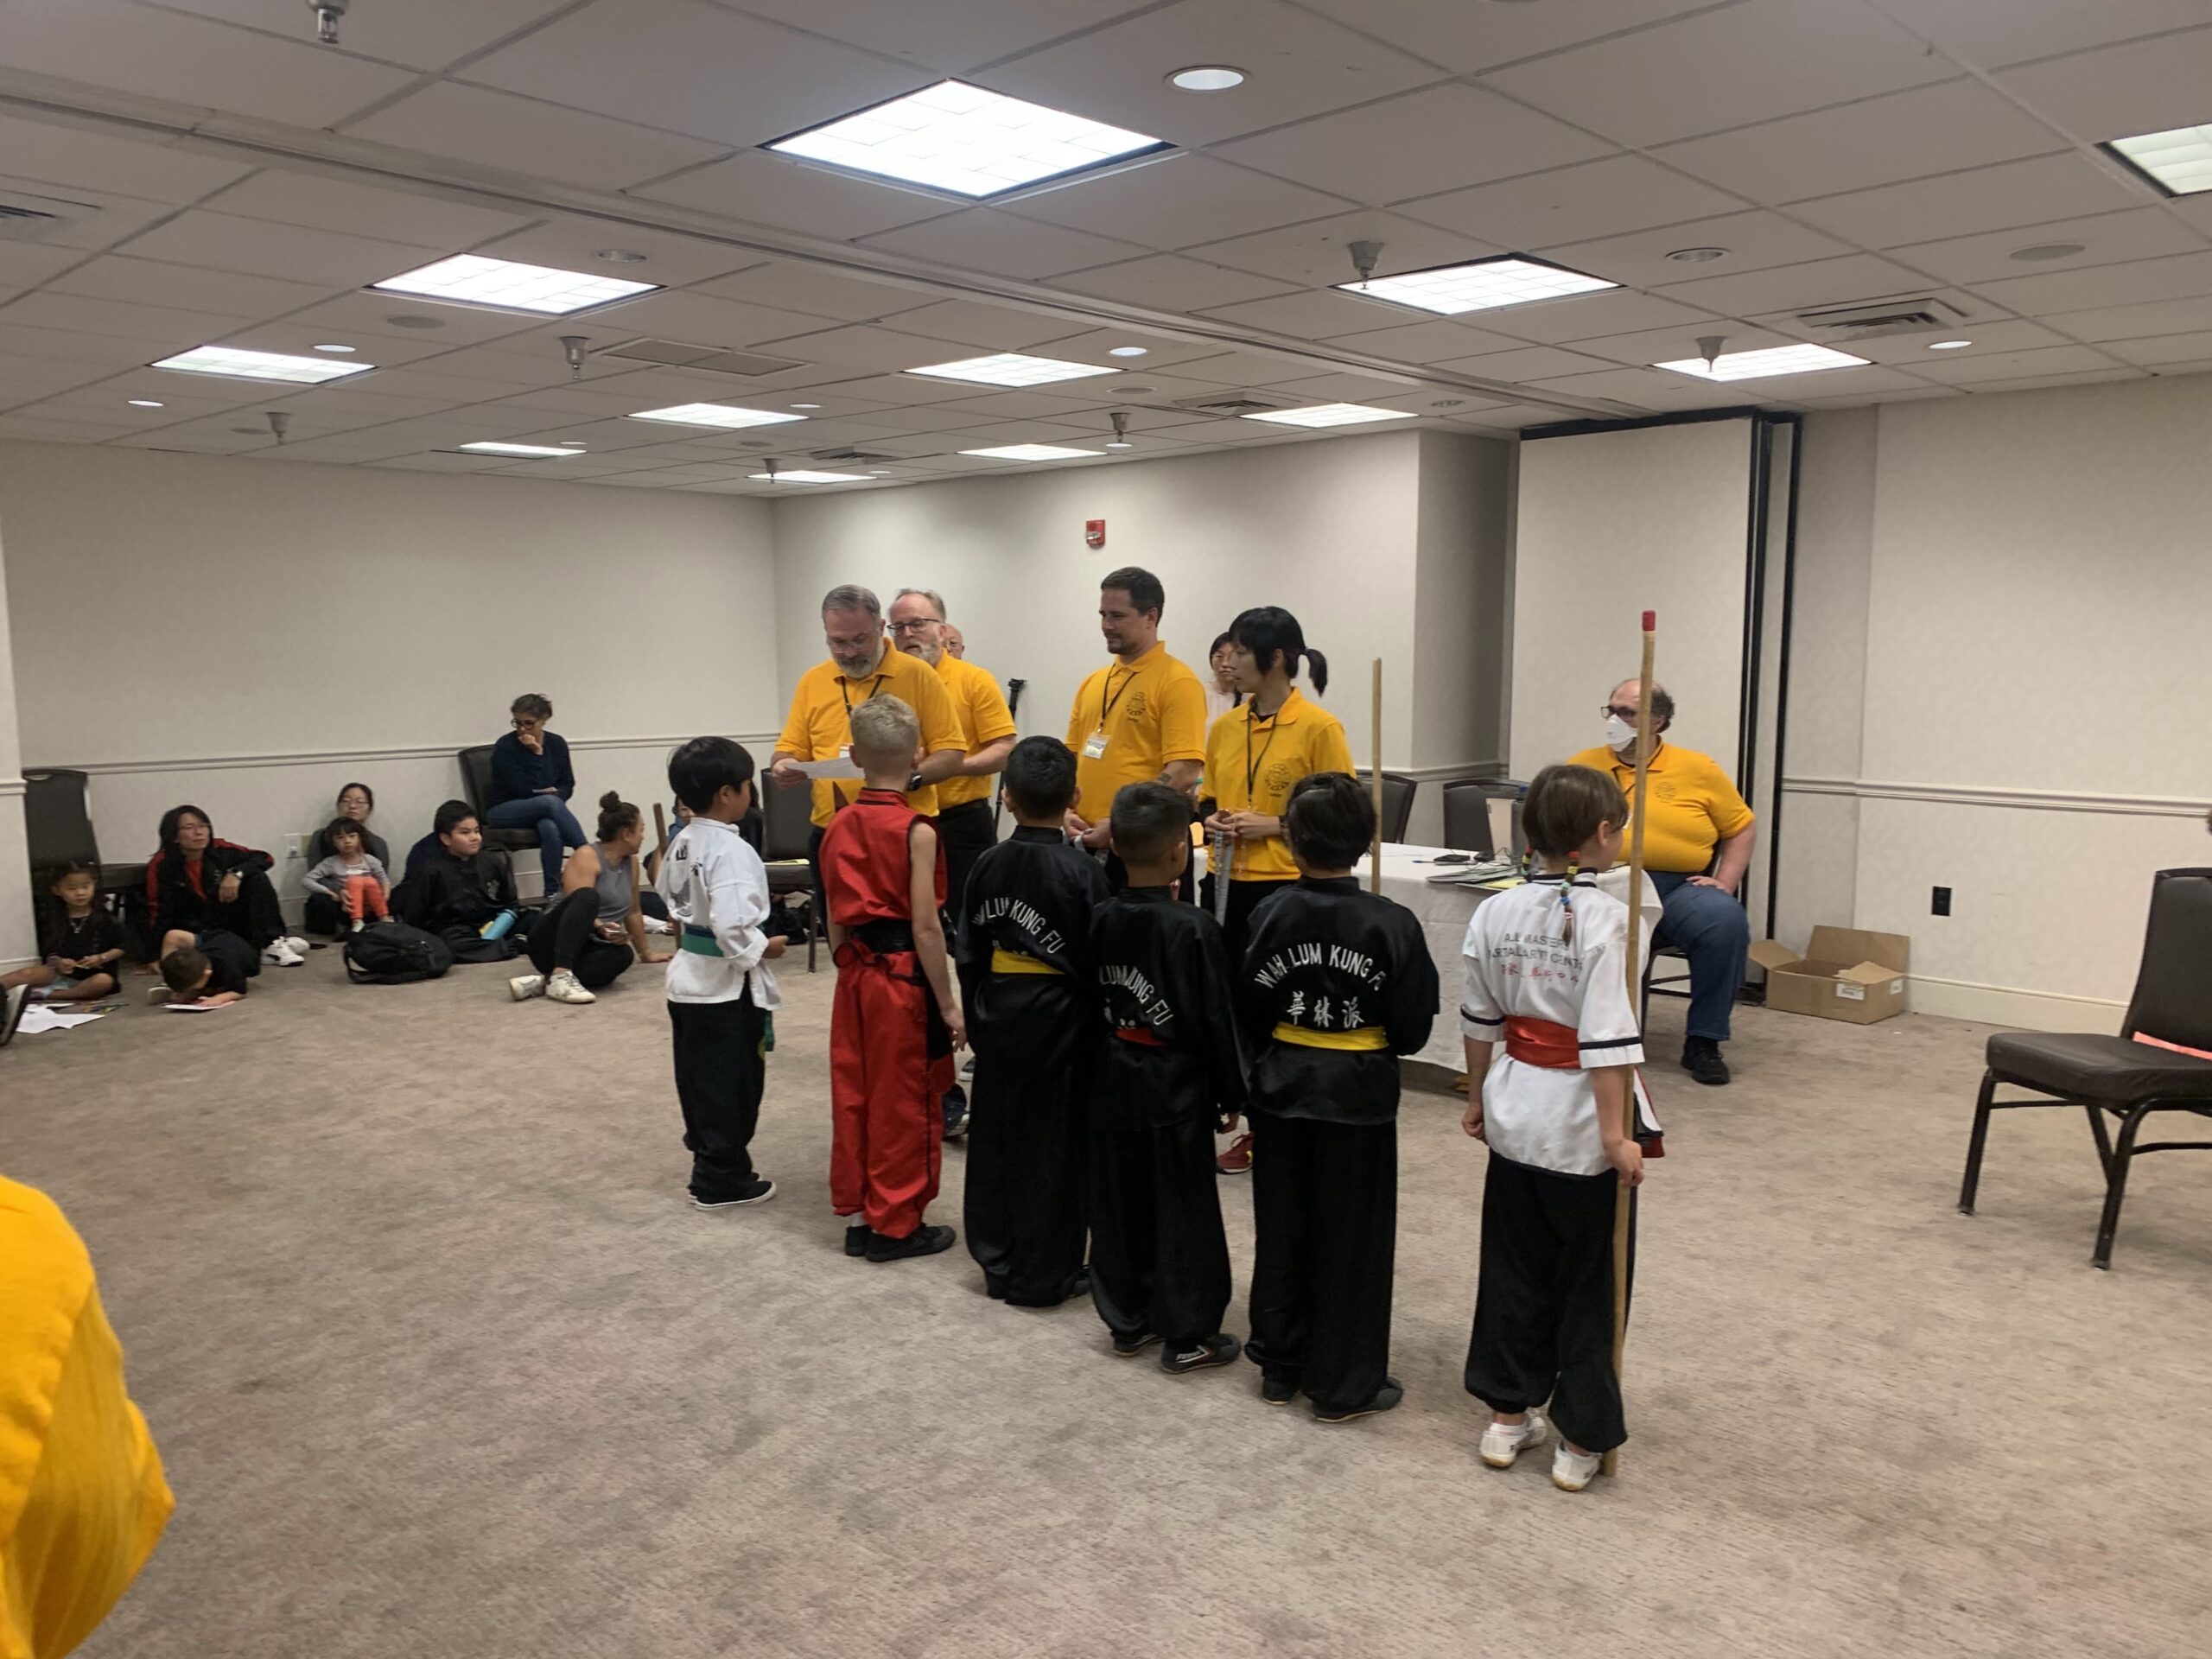 Some of the younger KuoShu competitors